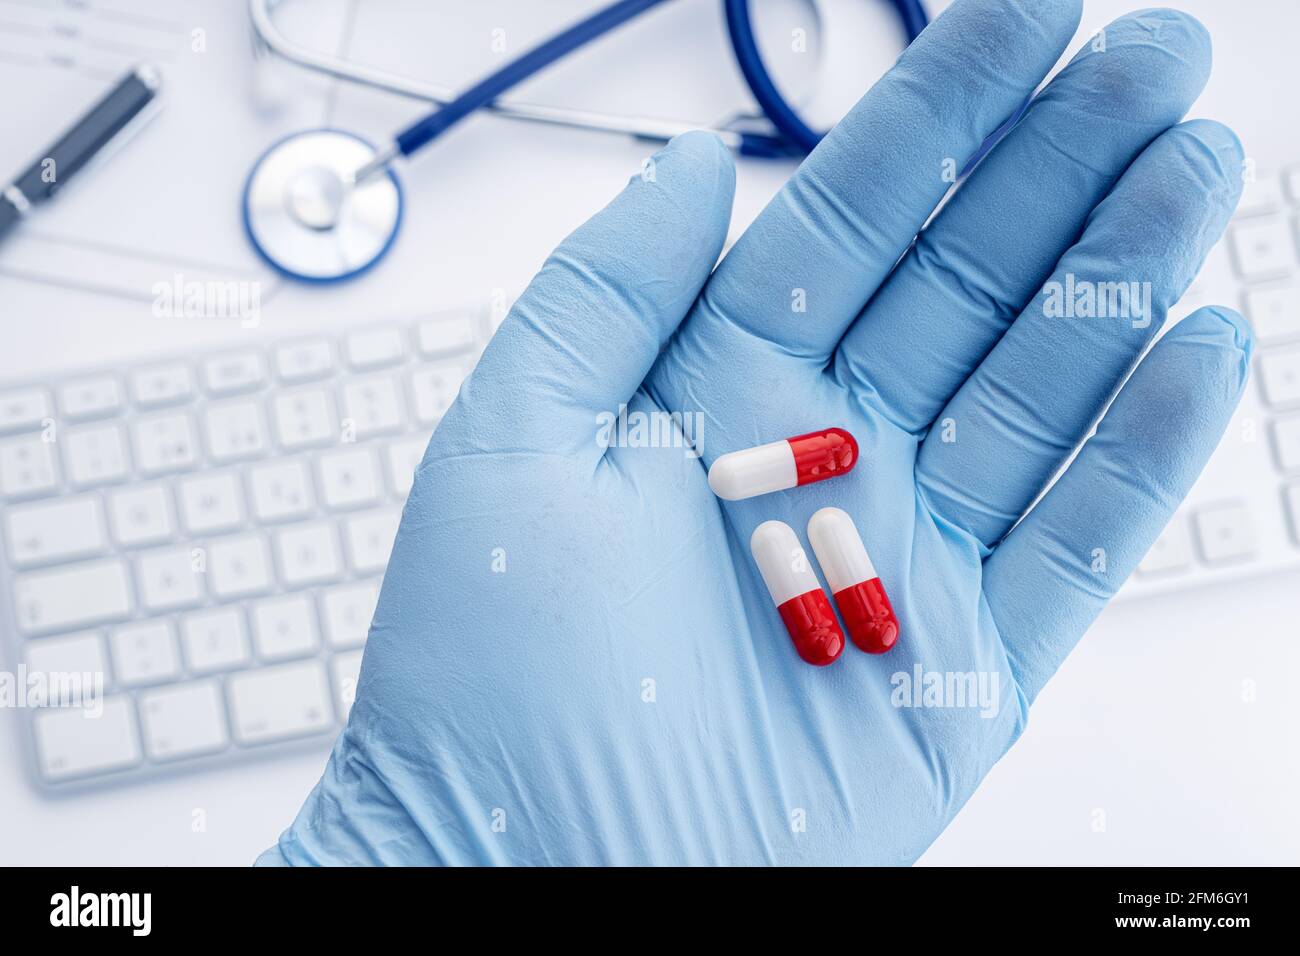 Human hand in protective glove holding pills and doctor desk at background. Medicine or Medicament concept Stock Photo